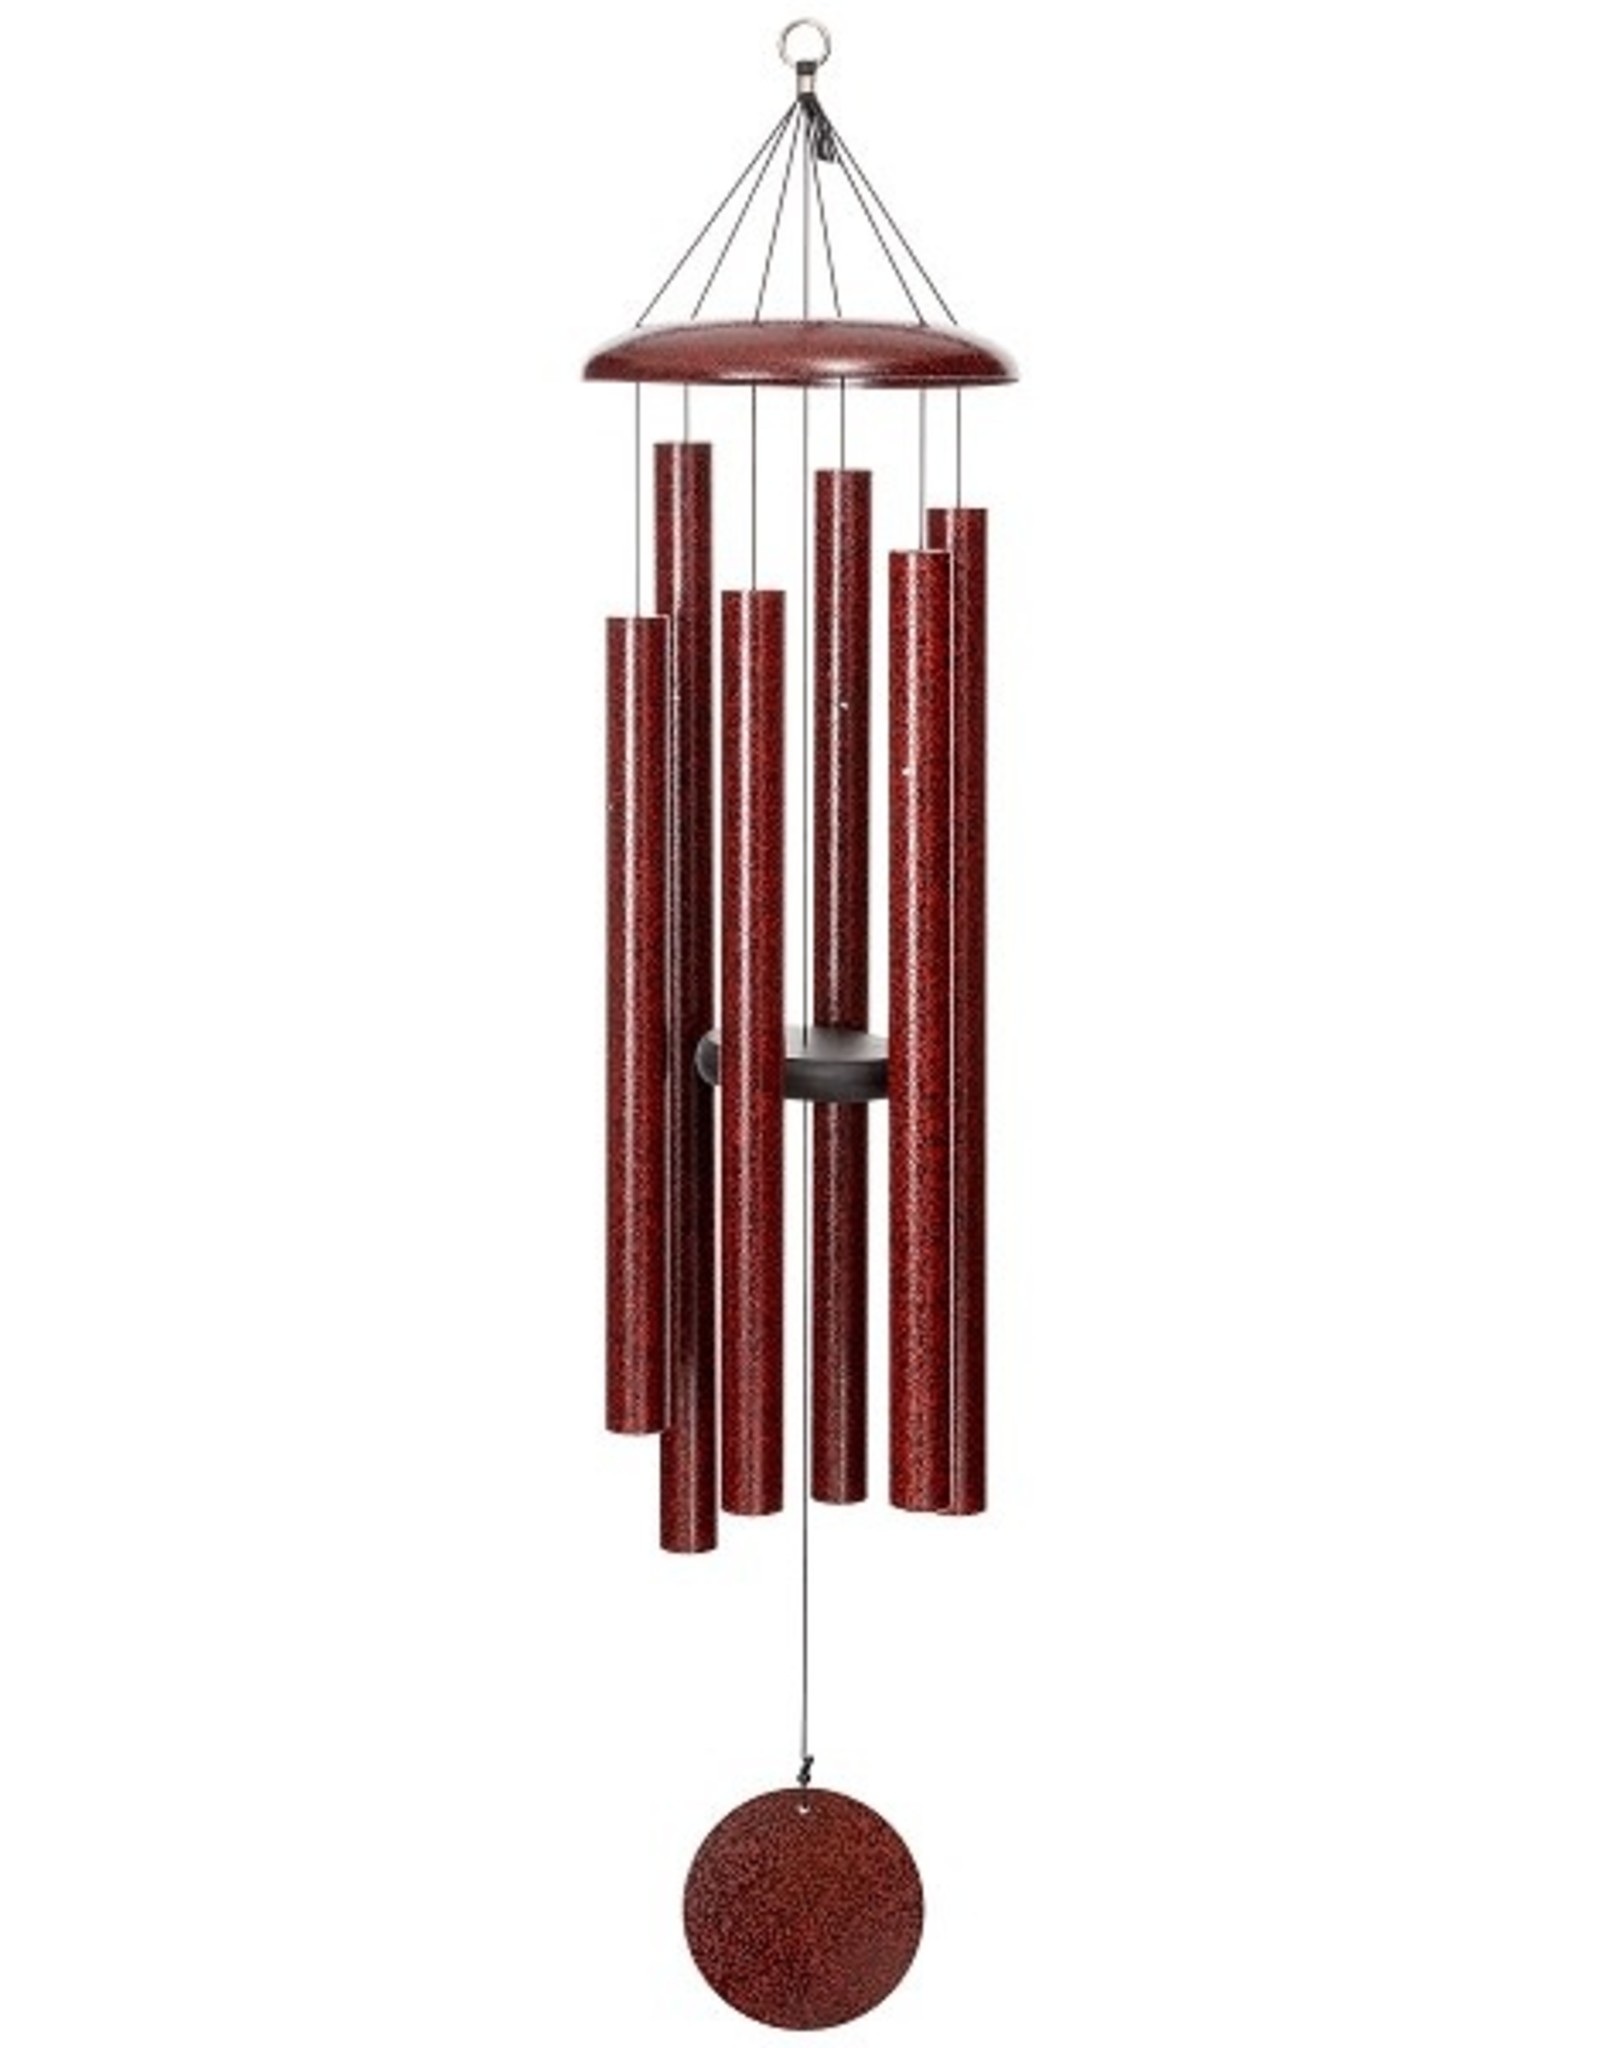 Wind River Chimes CORINTHIAN BELLS 50" CHIME - A scale